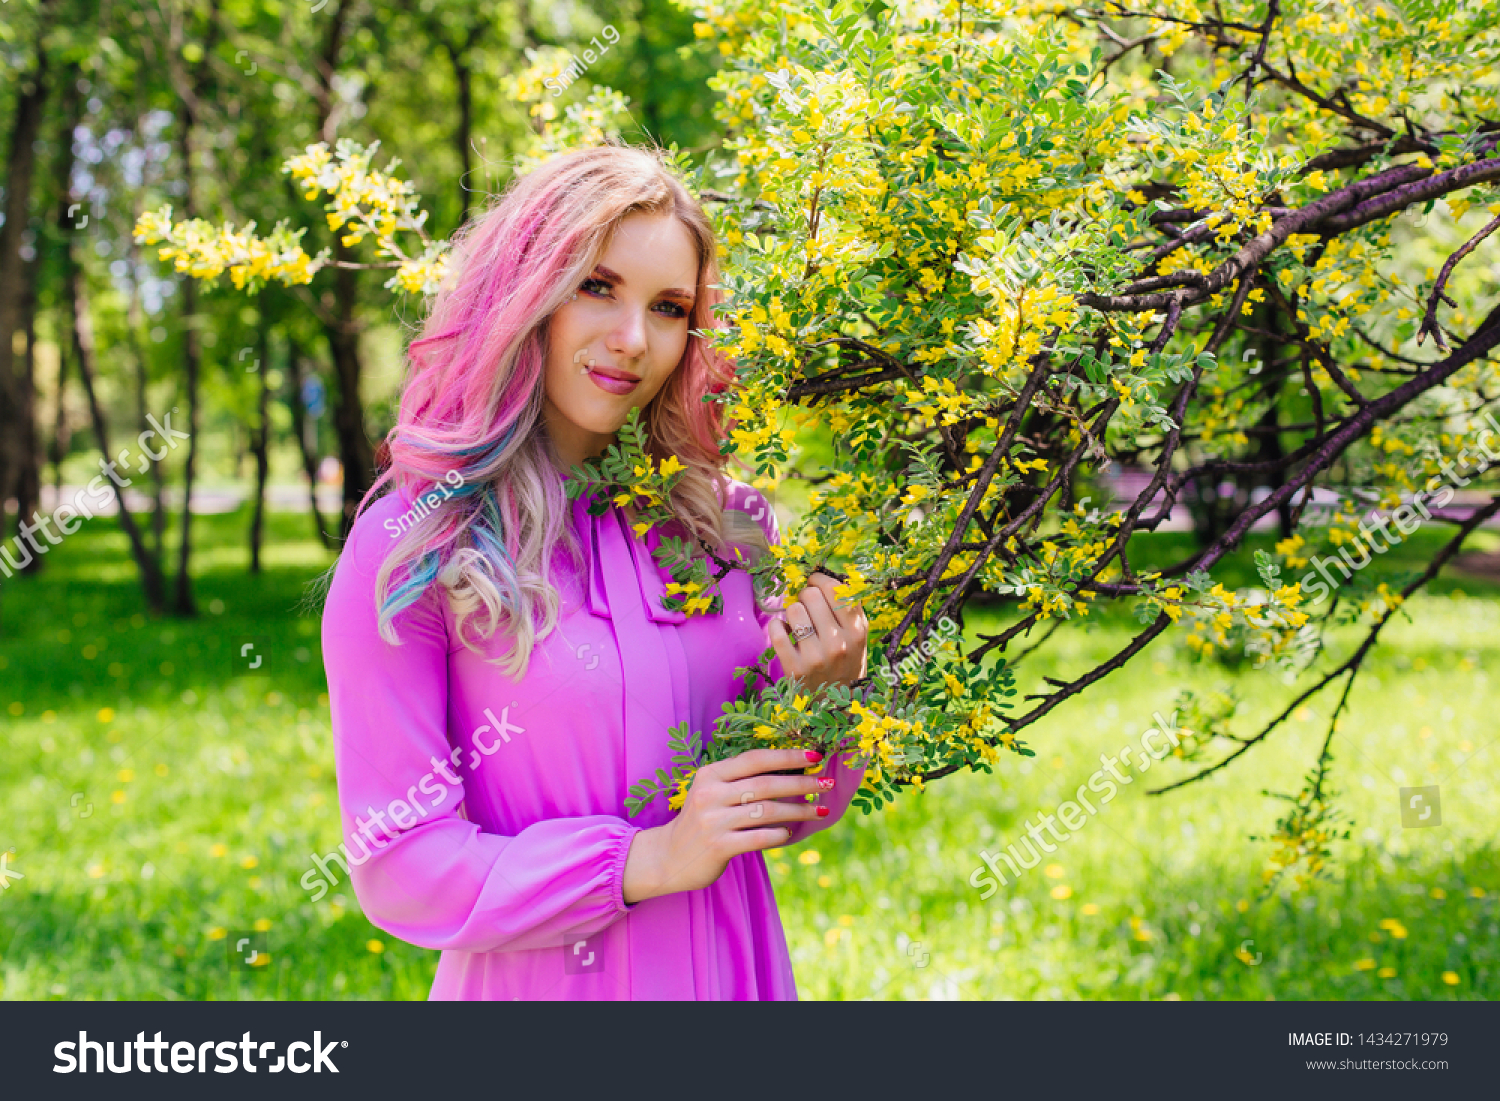 Beautiful fashion model girl with colorful dyed hair and perfect makeup and hairstyle standig next to blooming barberry bush with yellow flowers #1434271979